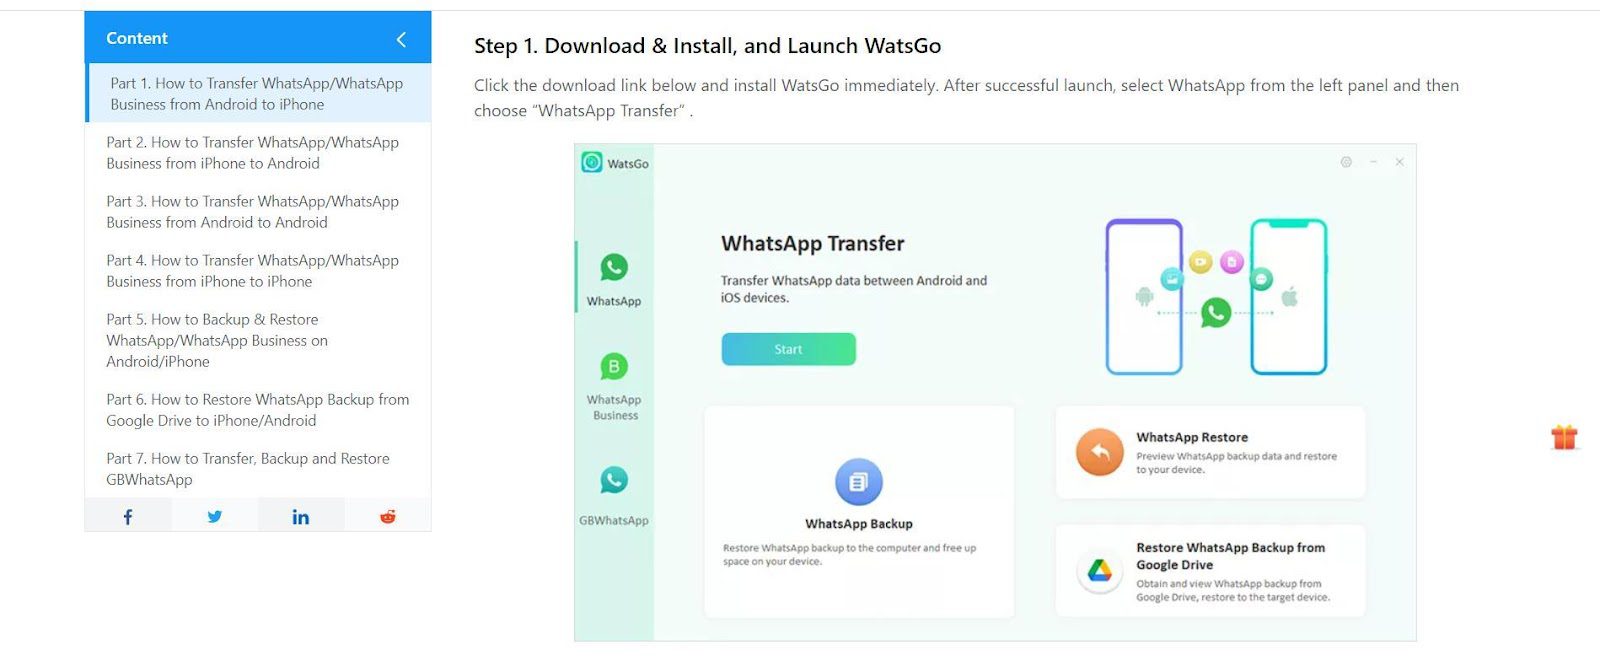 how-to-transfer-whatsapp-business-from-android-to-iphone-2023